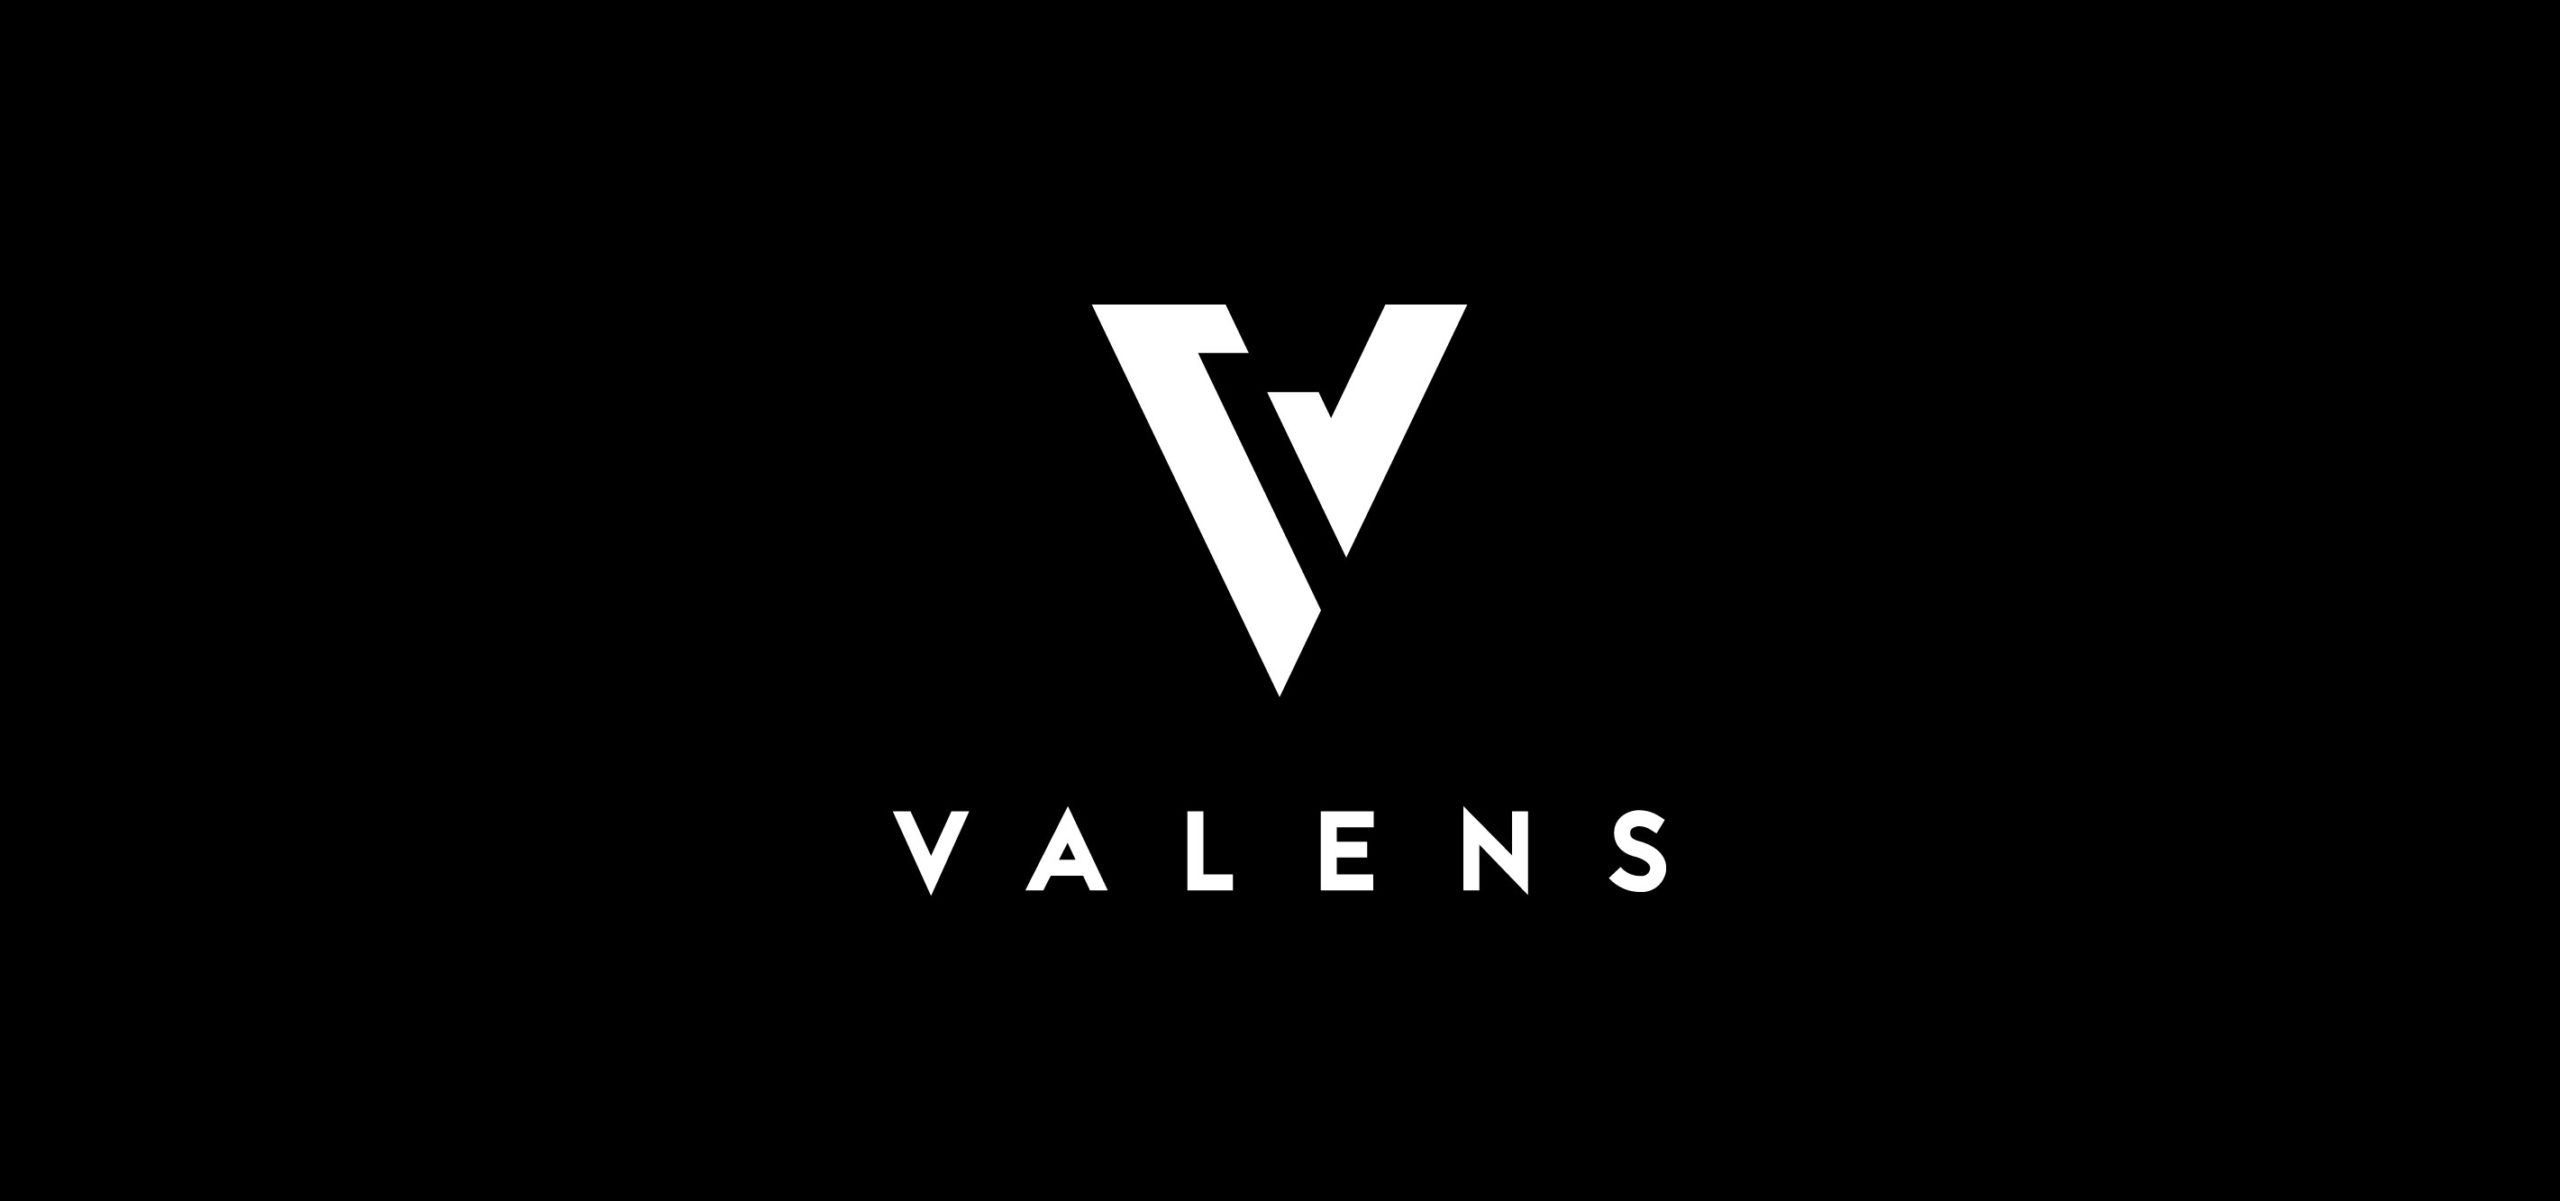 SōRSE TECHNOLOGY EXPANDS AGREEMENT WITH VALENS